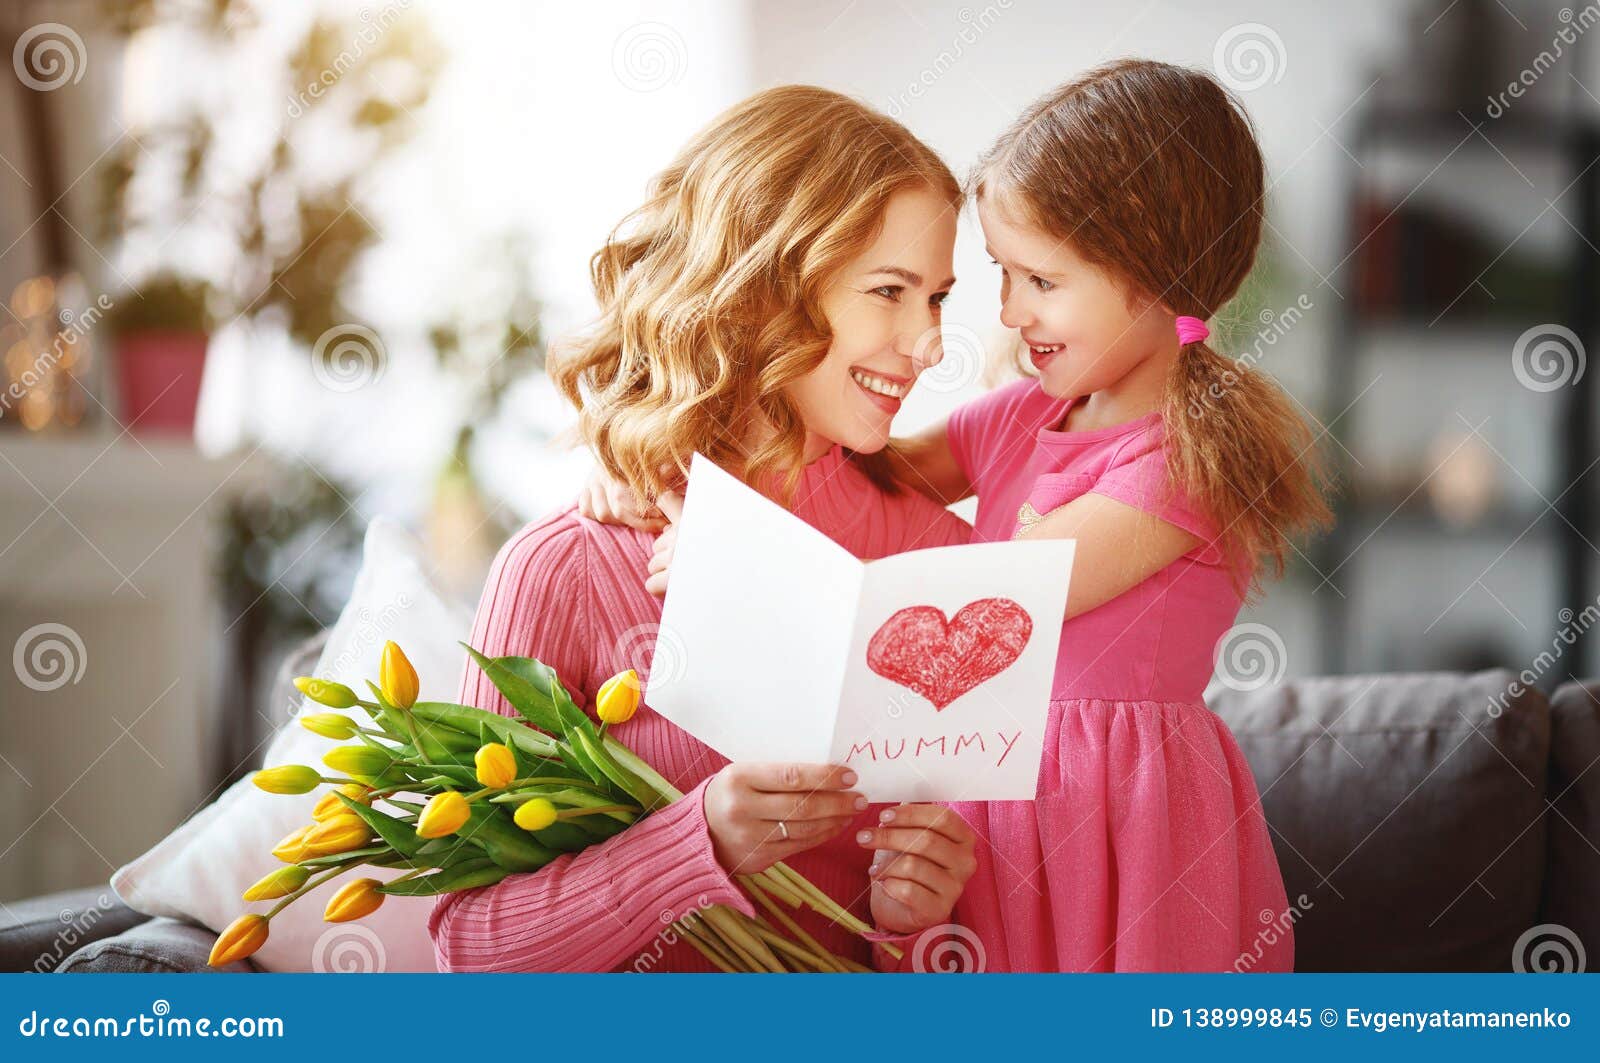 happy mother`s day! child daughter gives mother a bouquet of flowers to tulips and postcard